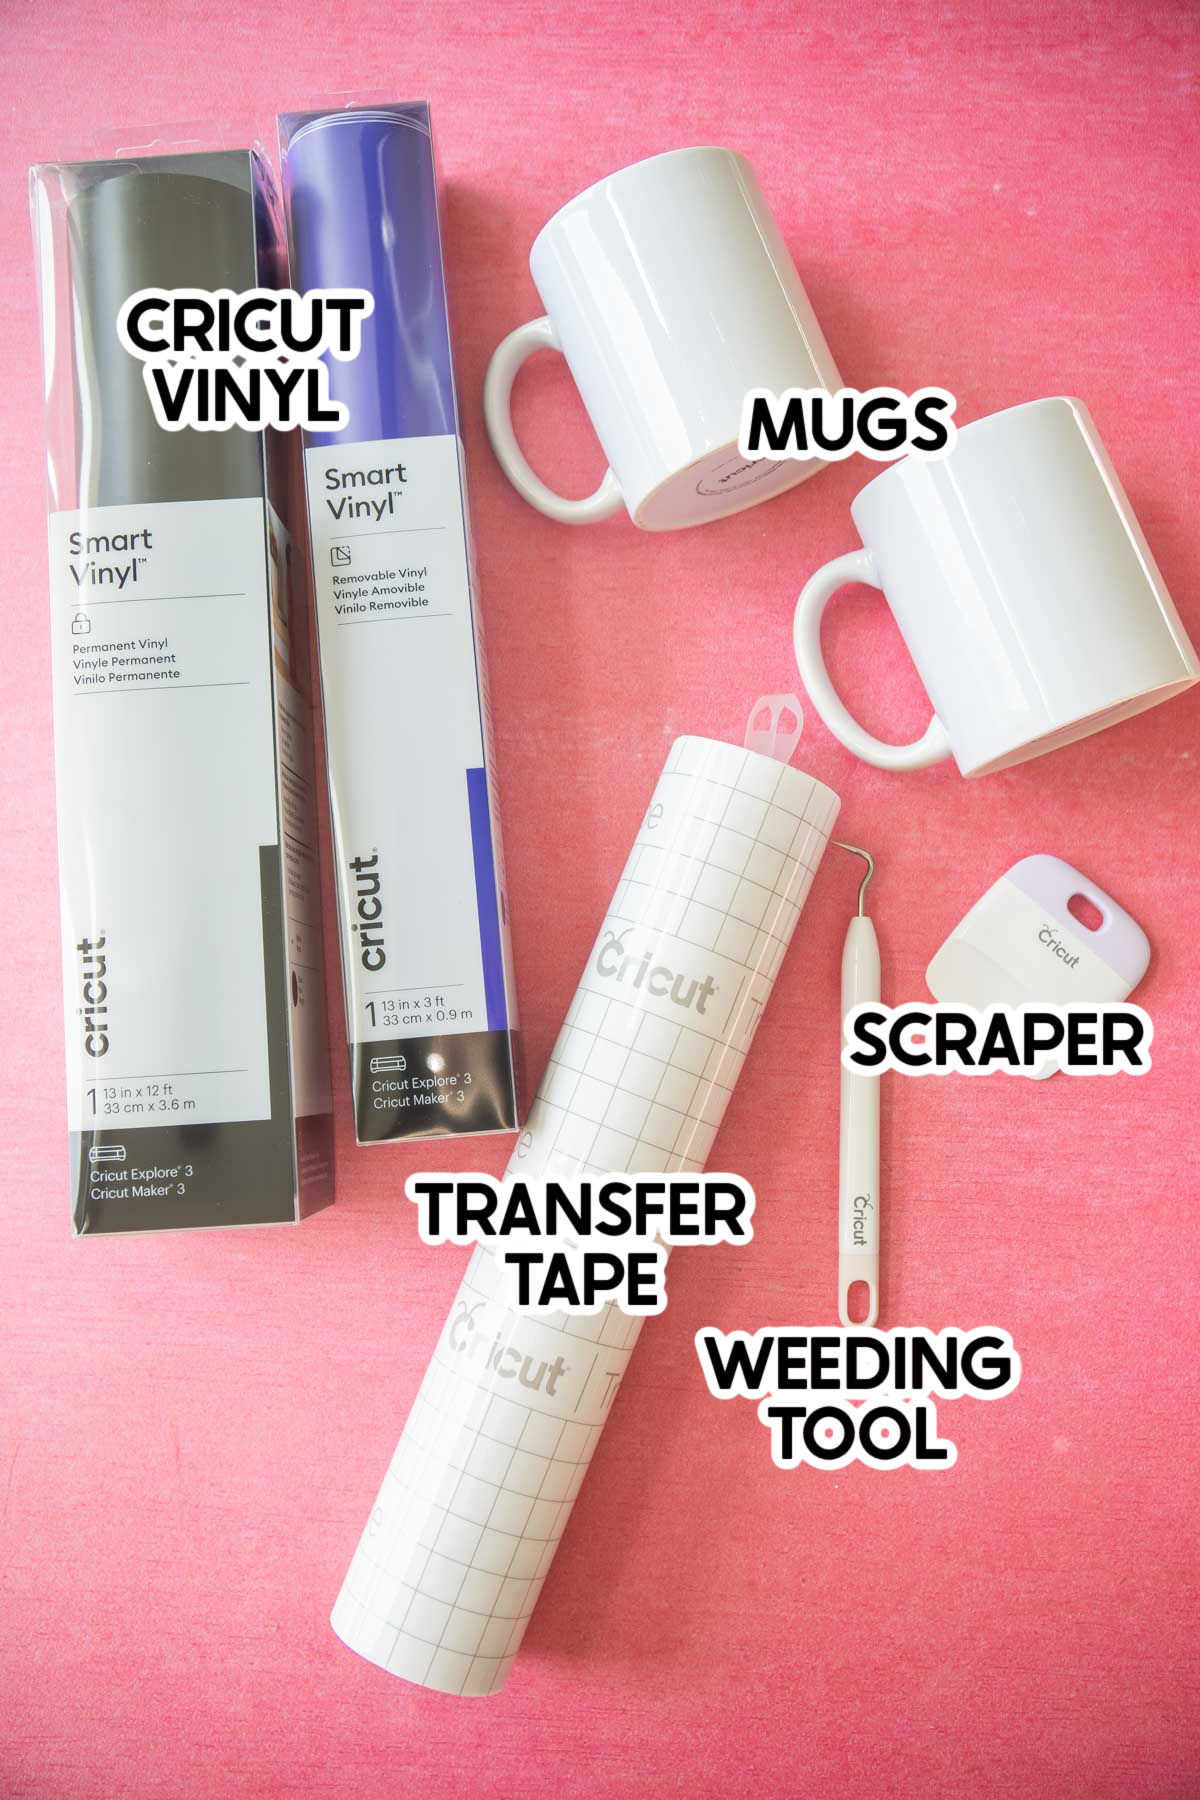 How to customize a glass mug in 10 minutes with a Cricut machine